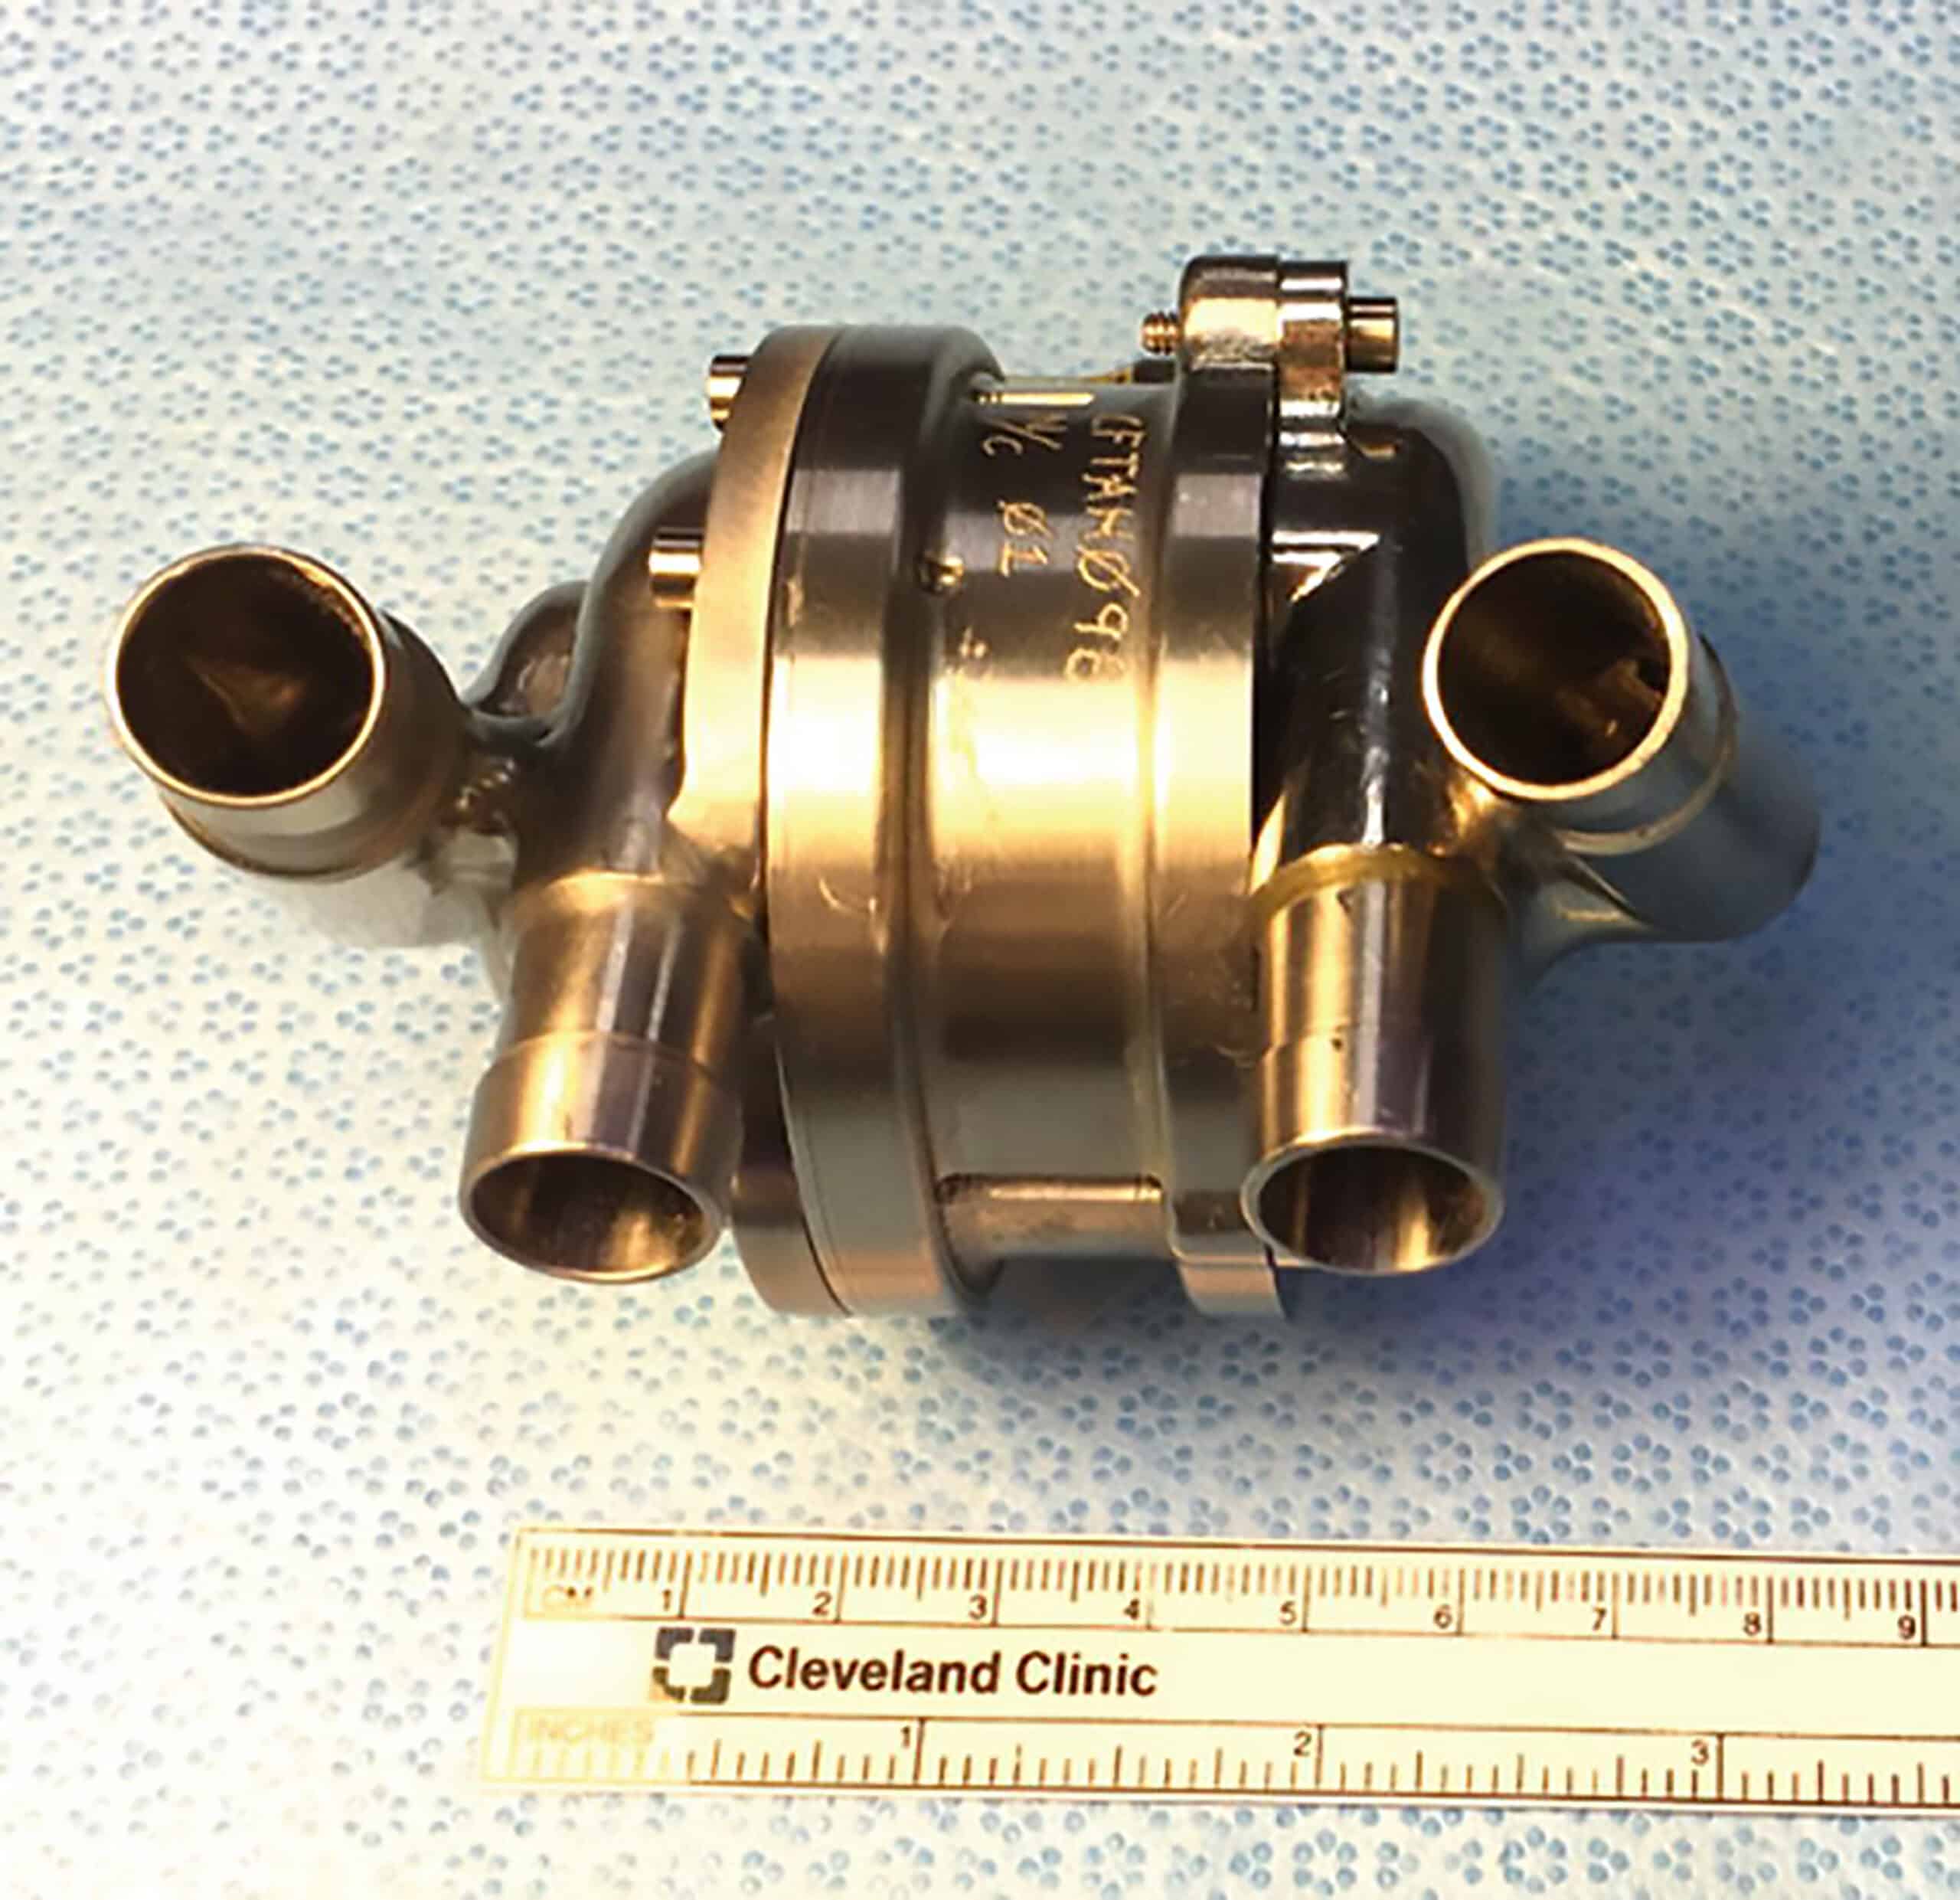 Manufactured first artificial heart pump for the Cleveland Clinic.